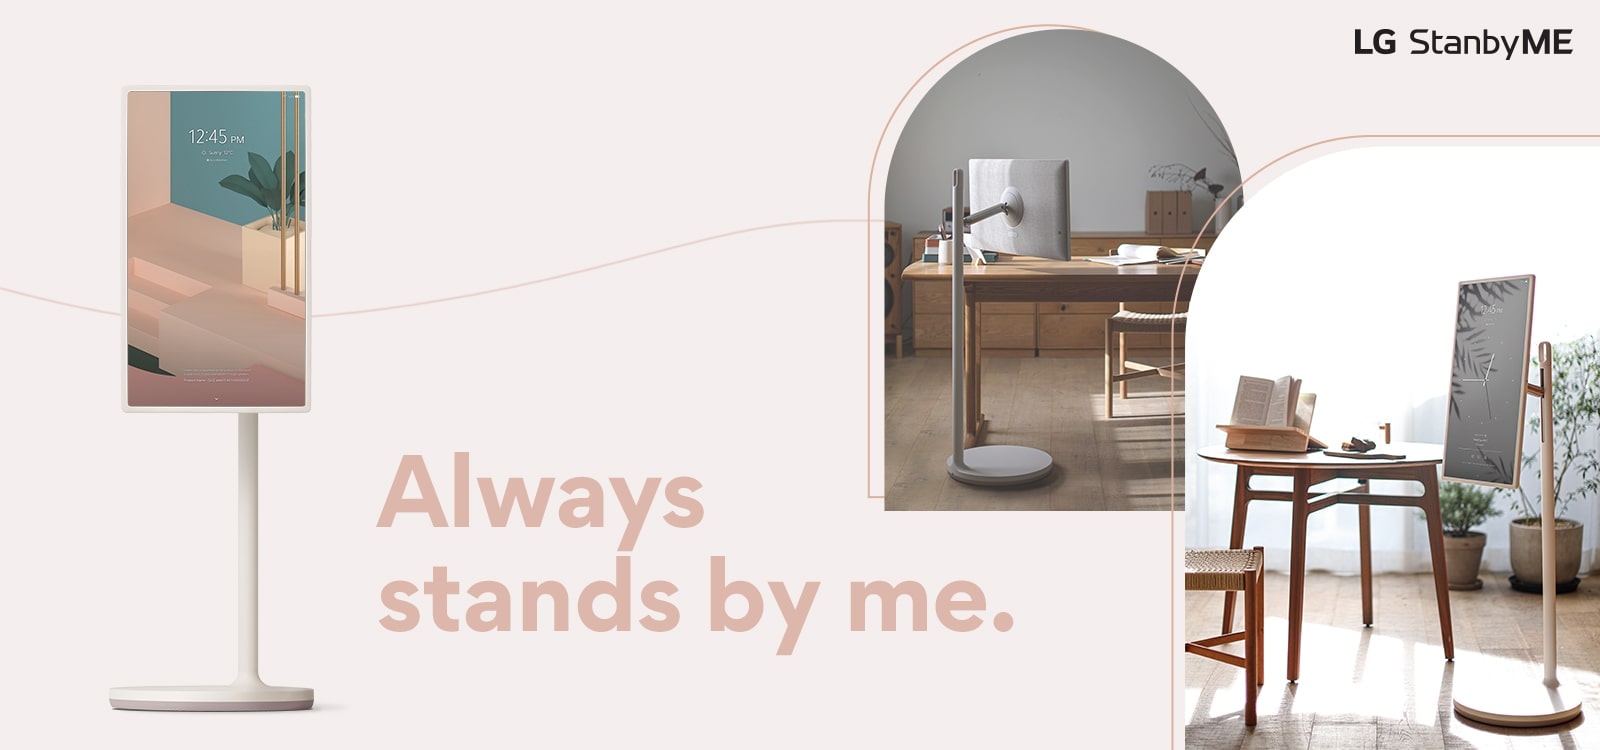 TV stands near copy – “Always stands by me.” Copy is written in dark pink color. There are two lifestyle interior images cropped in curved lines – each showing TV placed in study room and living room. LG StanbyME logo is placed on right top corner on desktop and left top corner on mobile view.